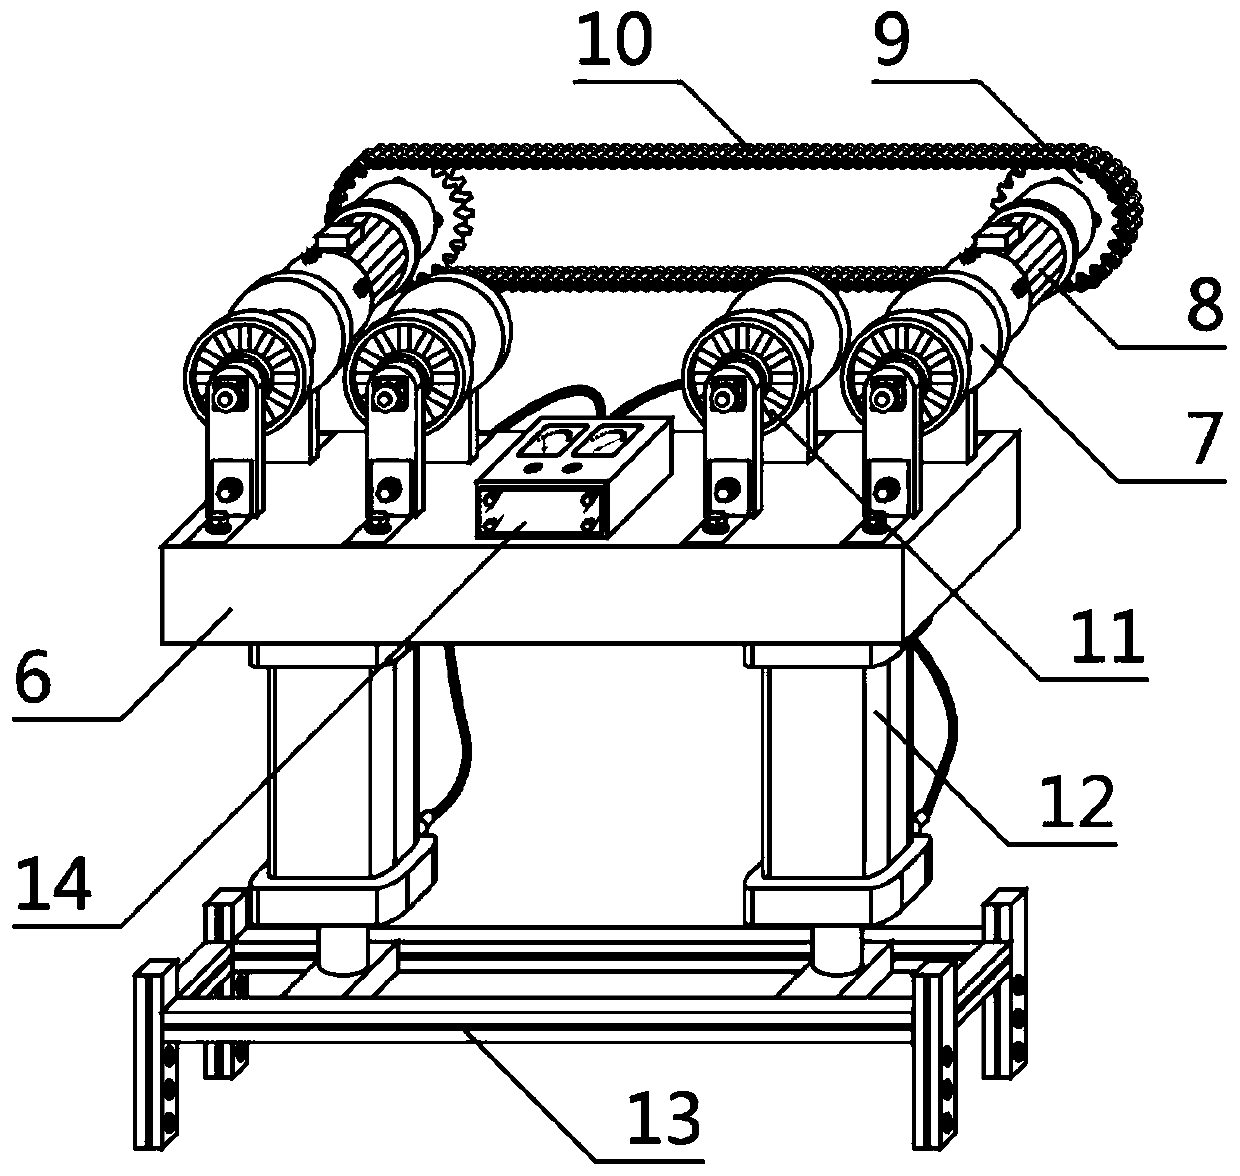 A displacement transmission structure of an inspection robot